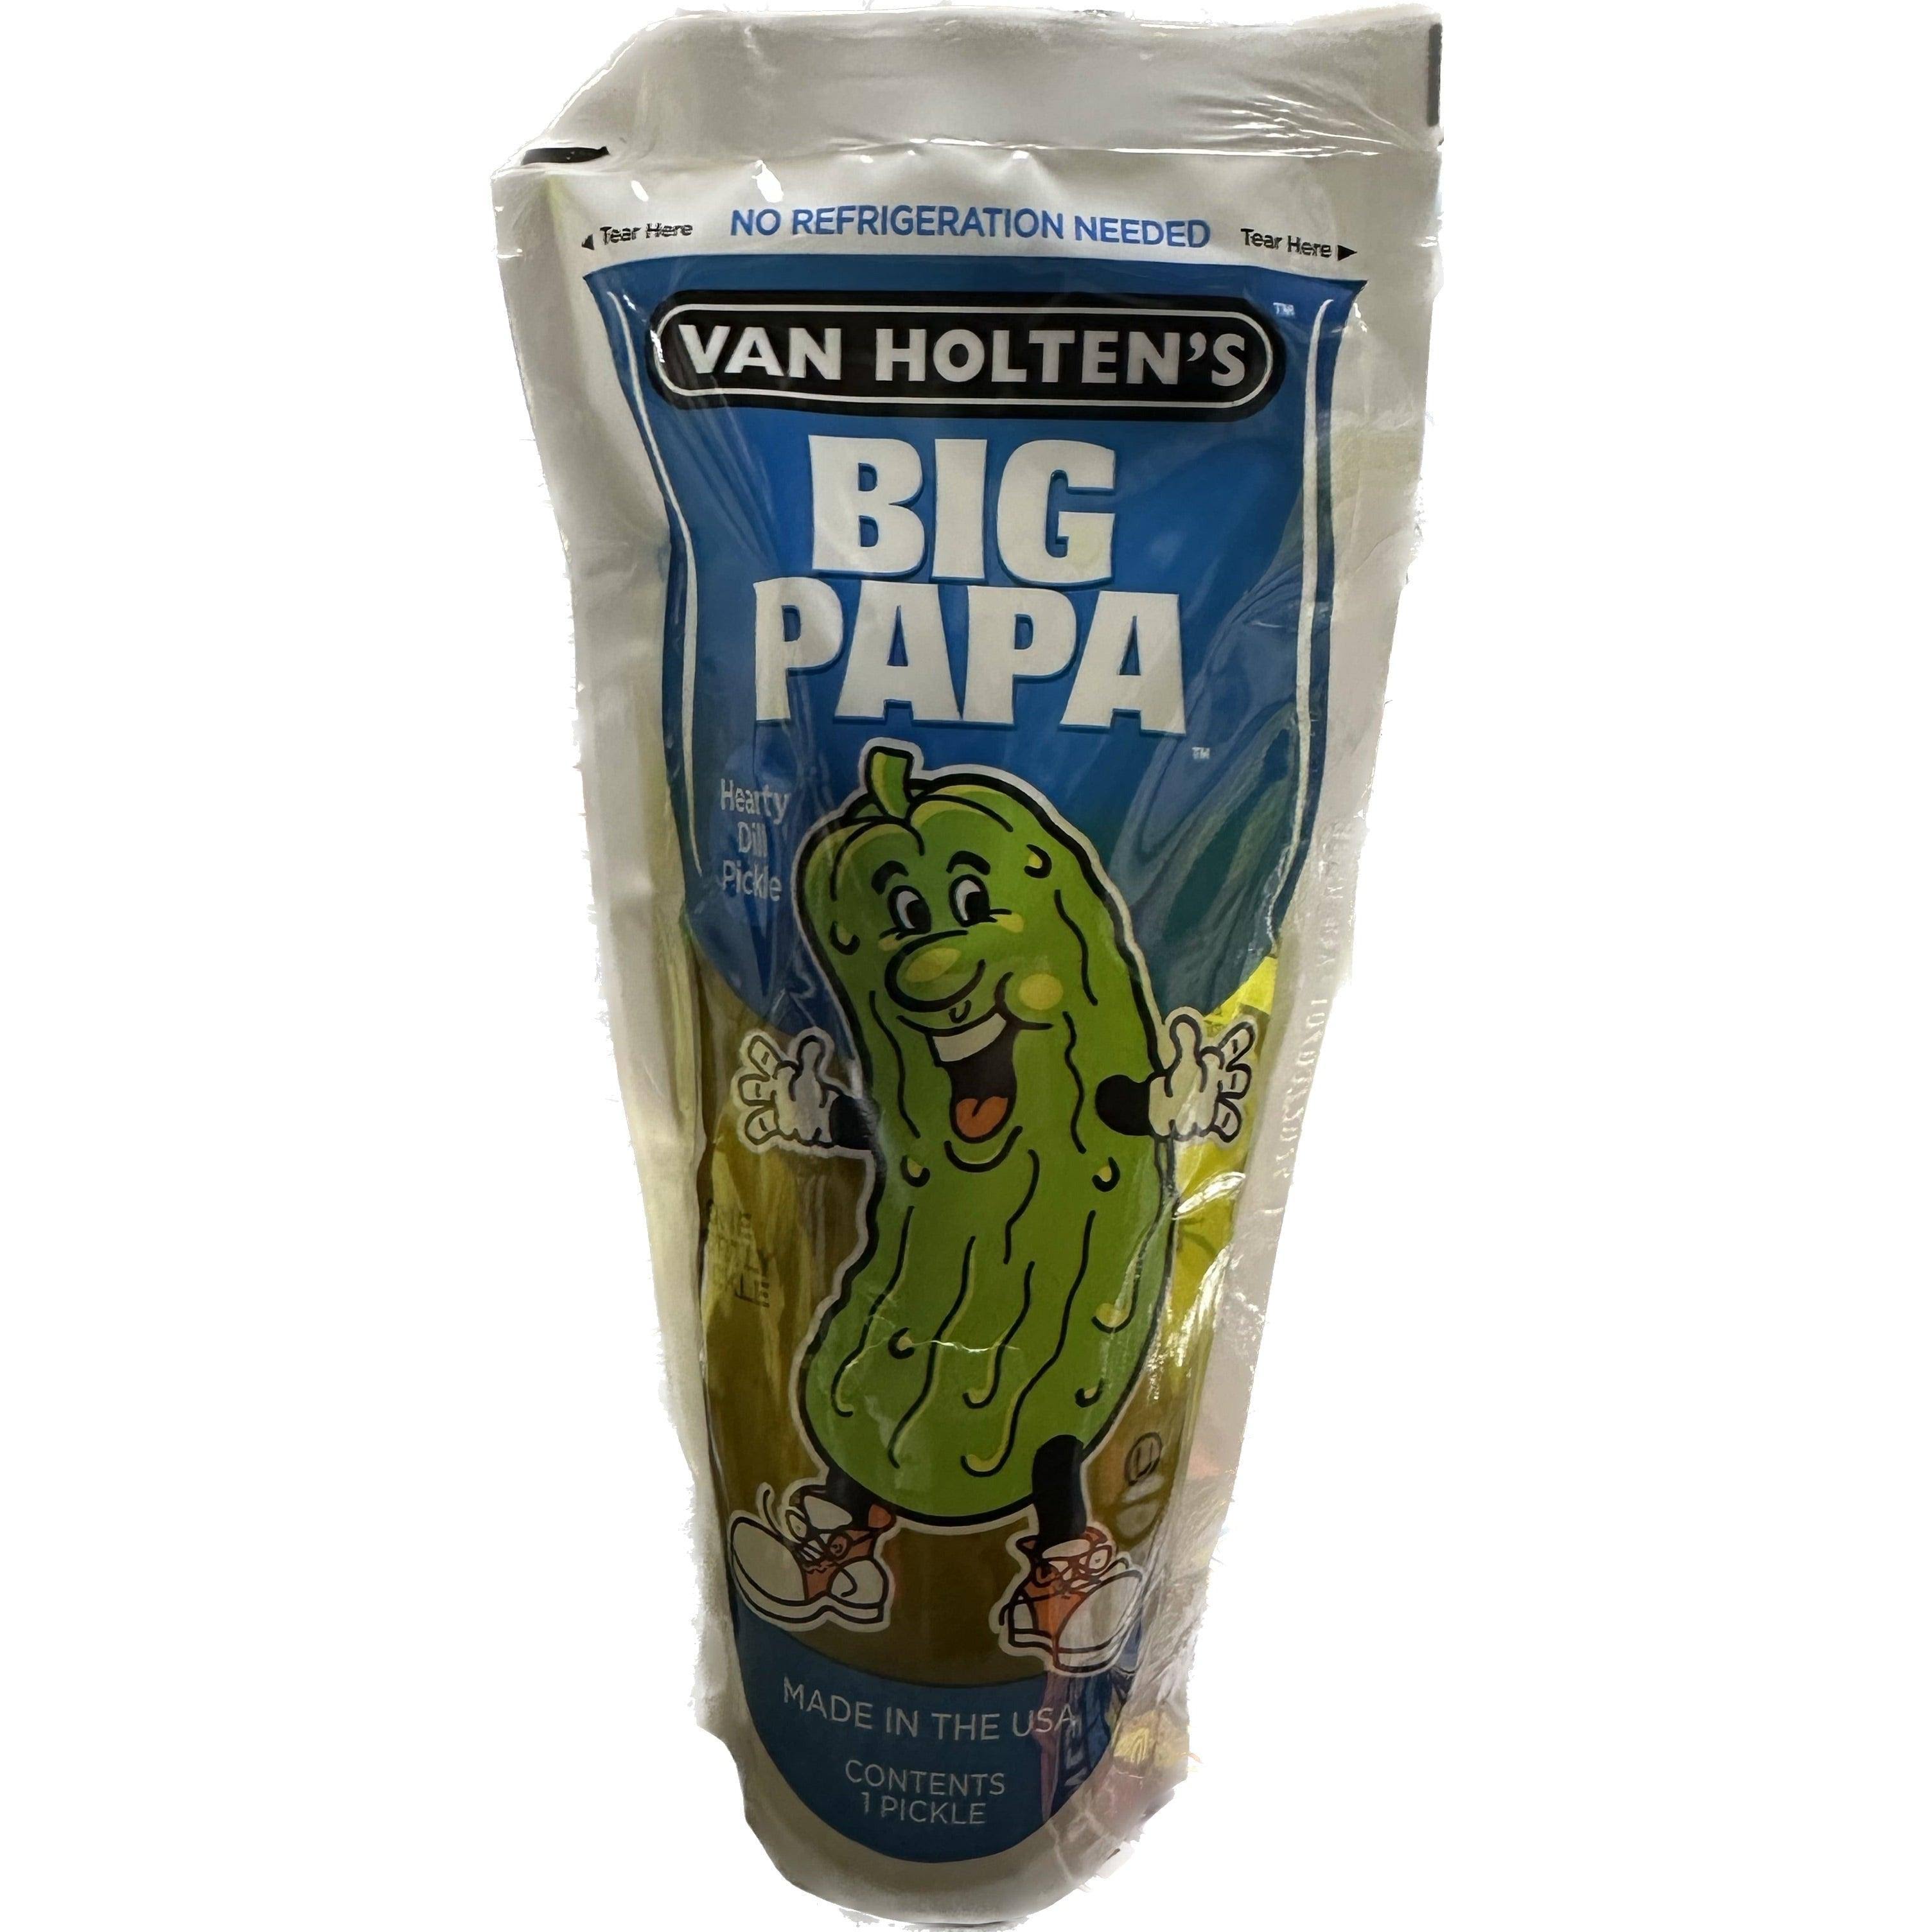 Van Holten's Big Papa Pickle - Hearty Dill